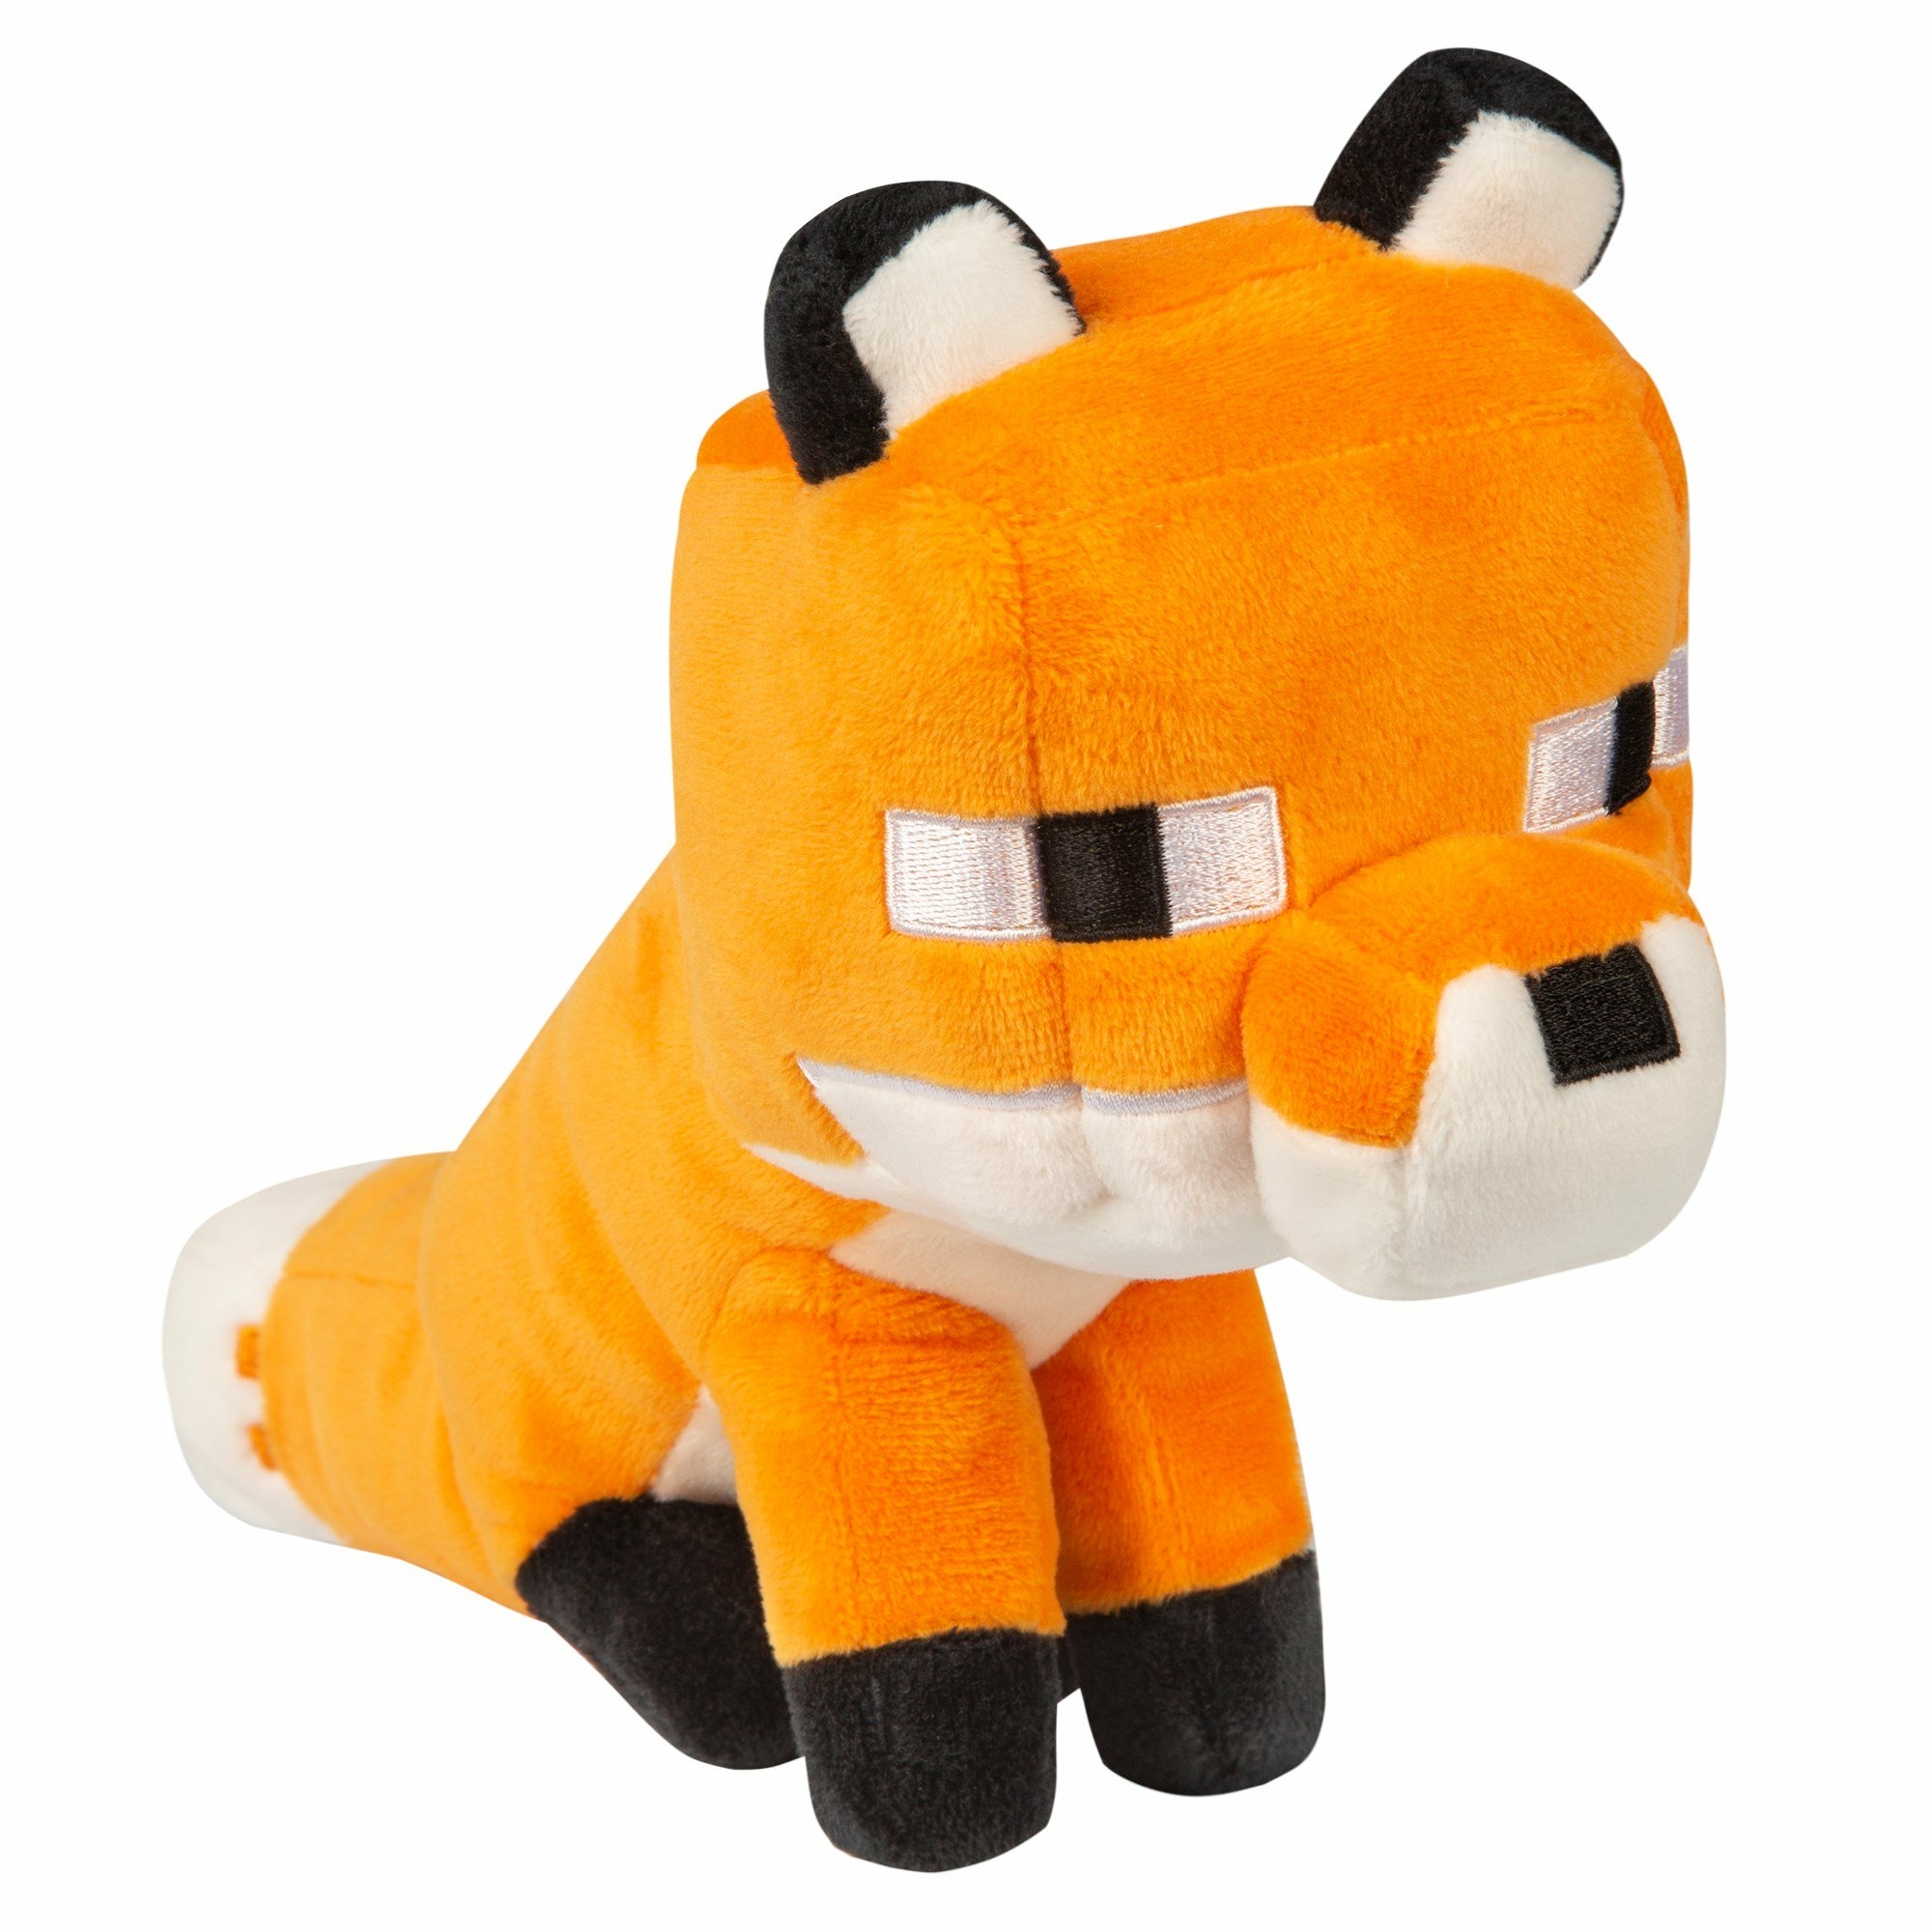 https://www.reference-gaming.com/assets/media/product/87520/minecraft-peluche-happy-explorer-fox-14cm-5e456ef9a3148.jpg?format=product-cover-large&k=1581608697